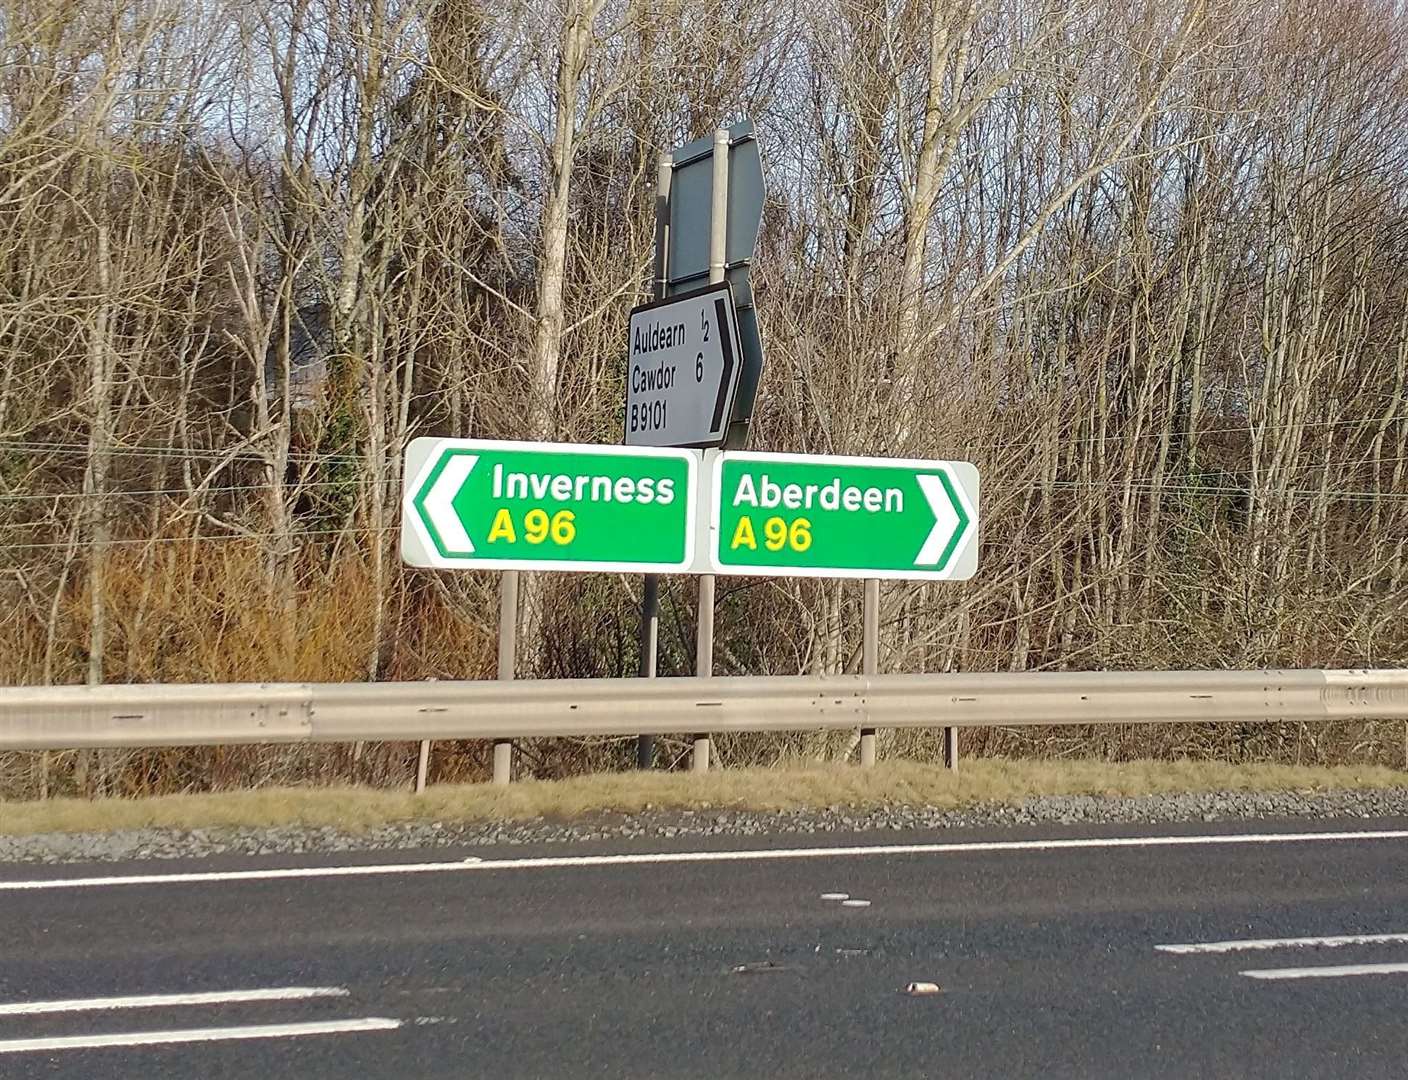 The lack of progress on dualling the A96 is continuing to cause frustration.